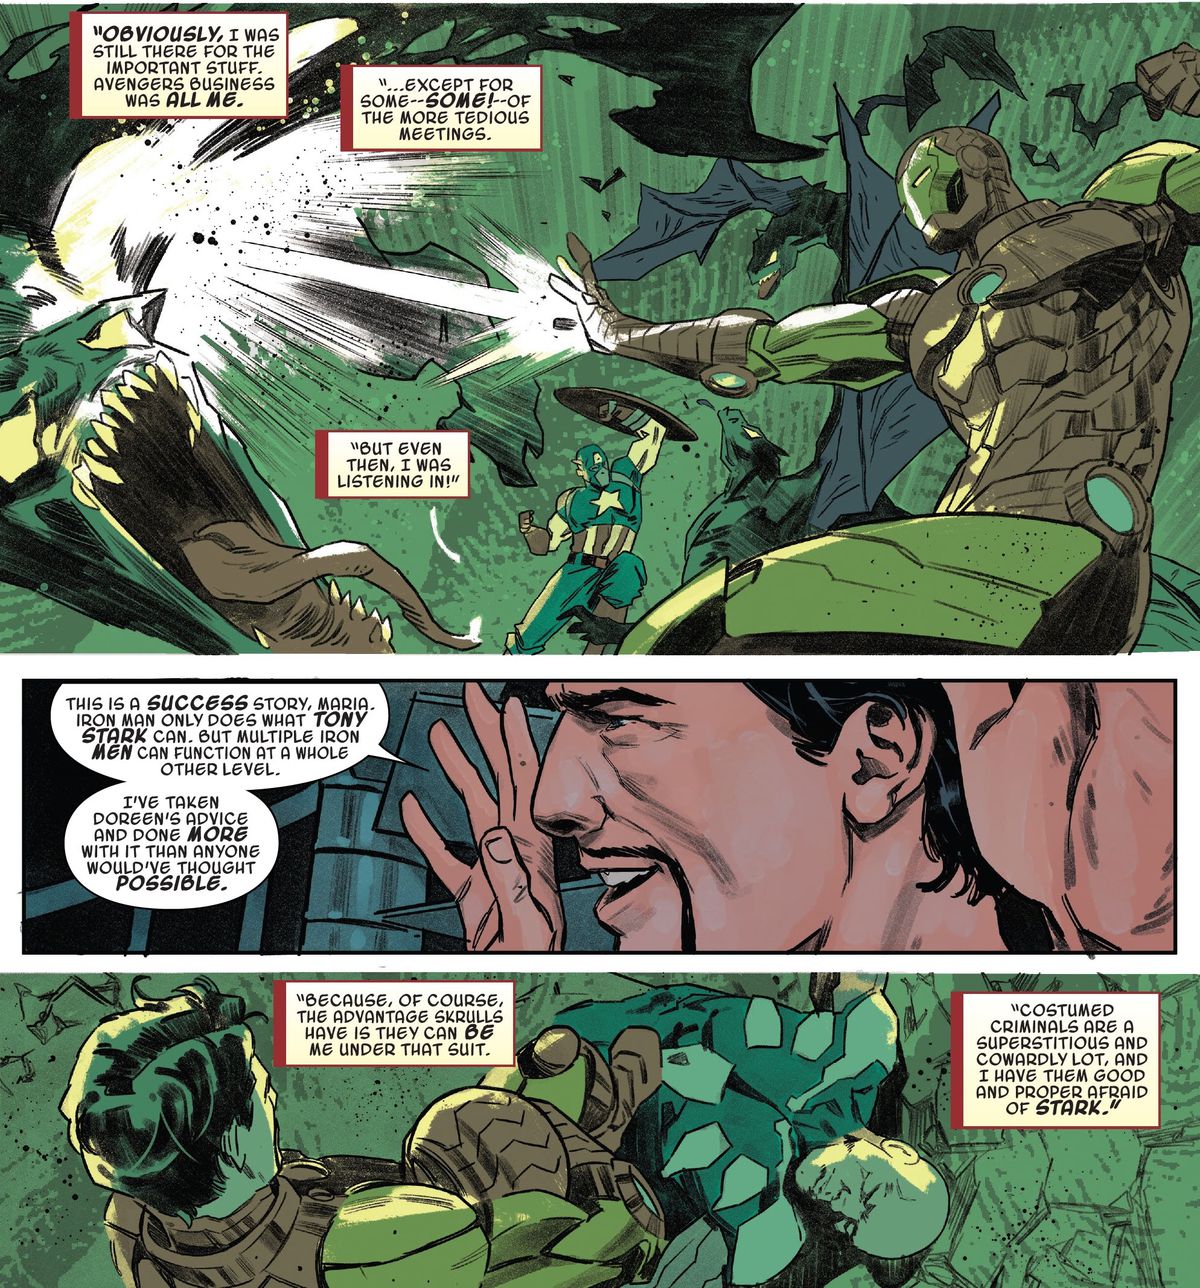 Iron Man explains that his plan to hire Skrulls to pretend to be him and do superhero work was inspired by Squirrel Girl. “I’ve taken Doreen’s advice and done more with it than anyone would’ve thought possible,” in Secret Invasion #3. 